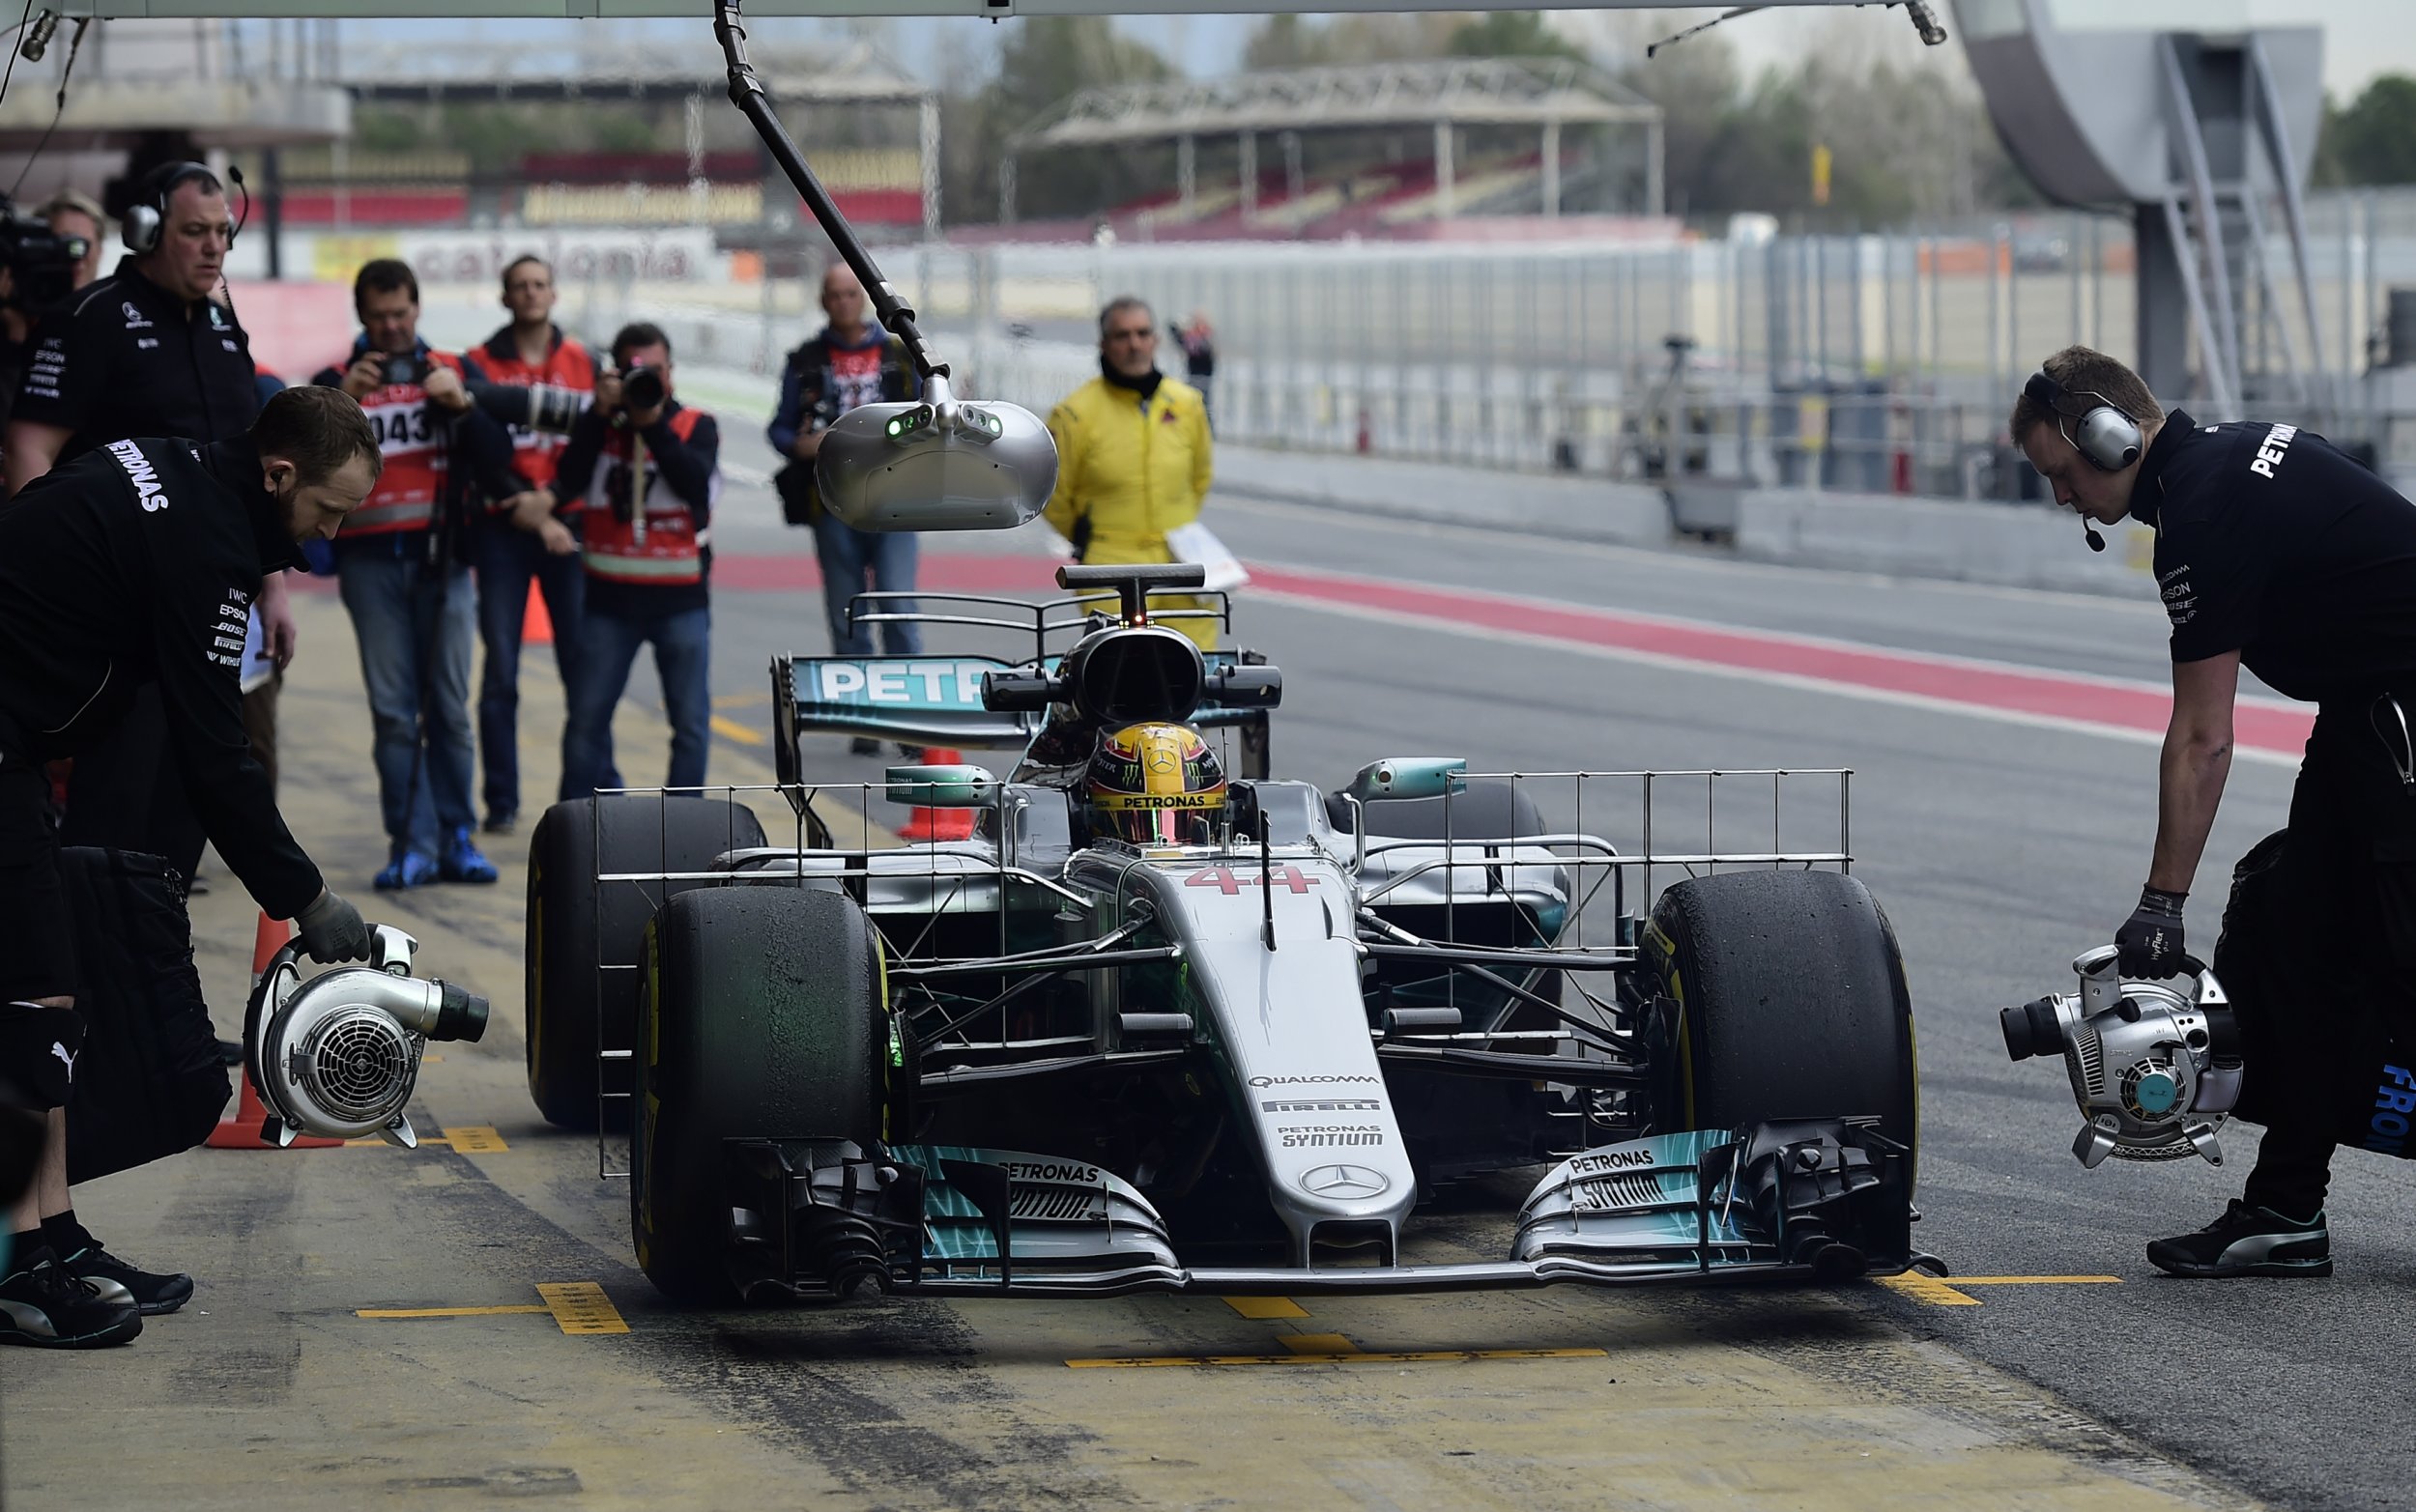 Mercedes-AMG driver Lewis Hamilton in Montmelo, on the outskirts of Barcelona, Spain, February 28.